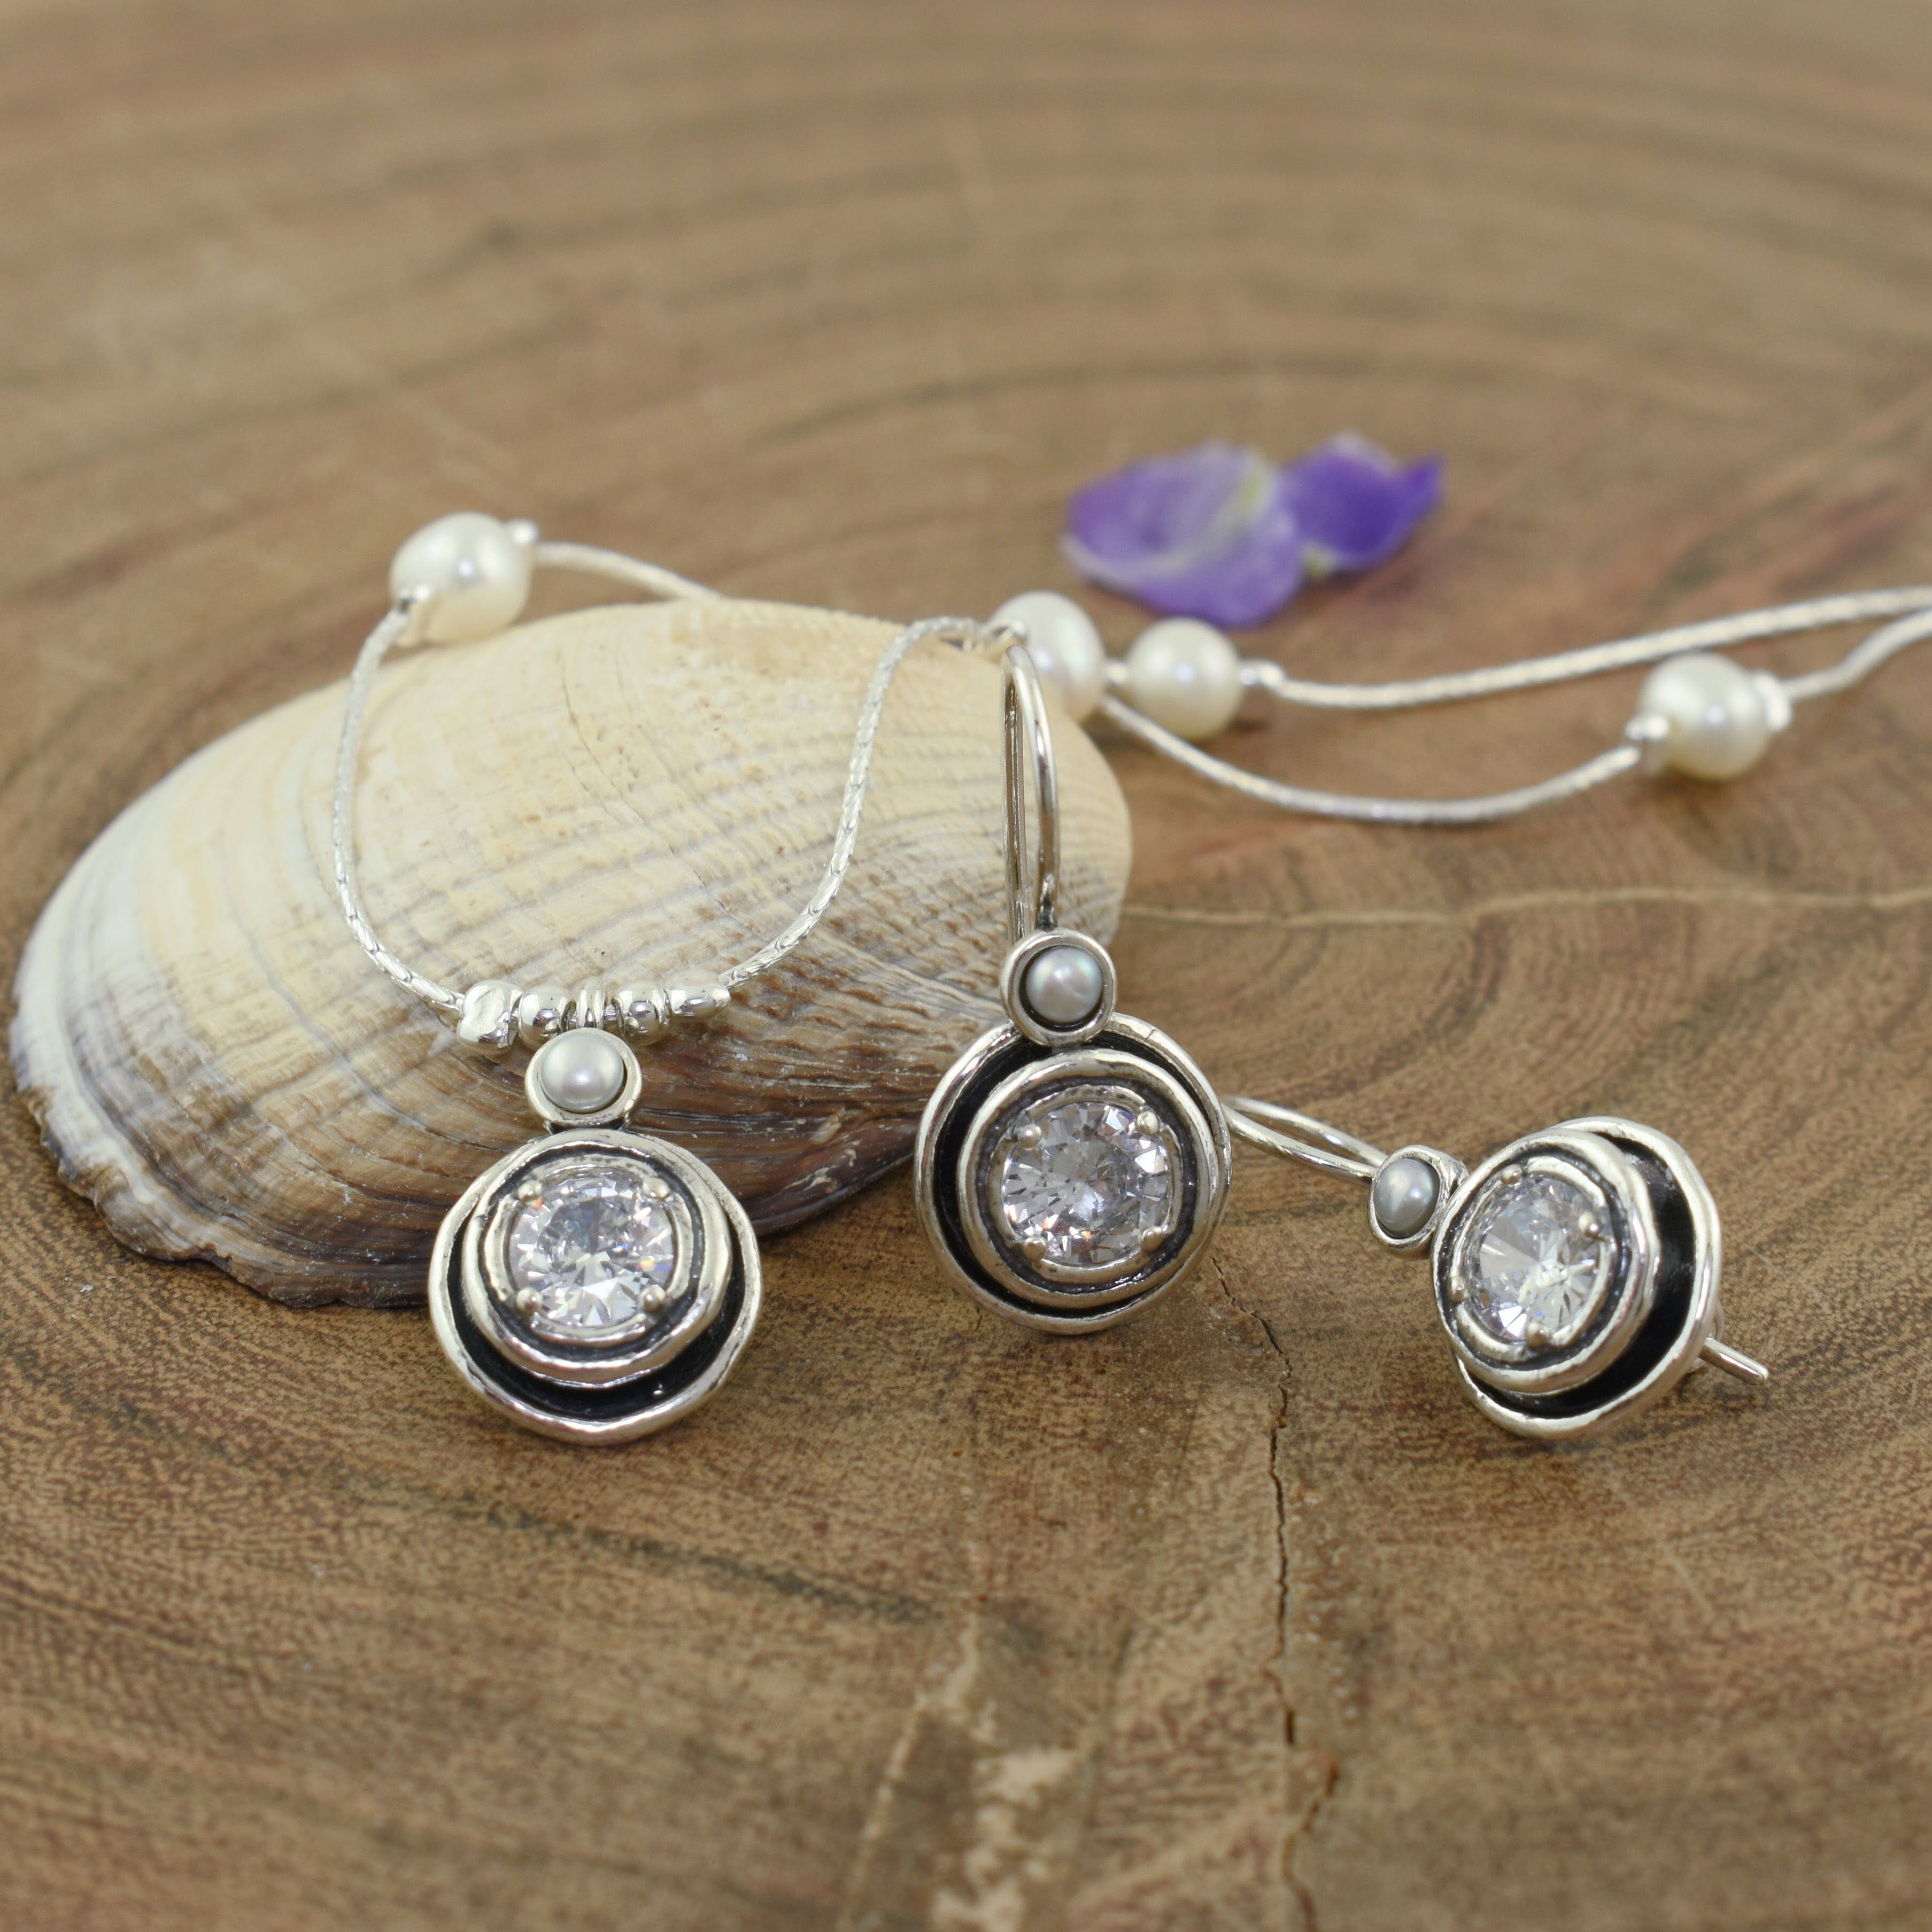 Halo There sterling silver necklace and earring matching set